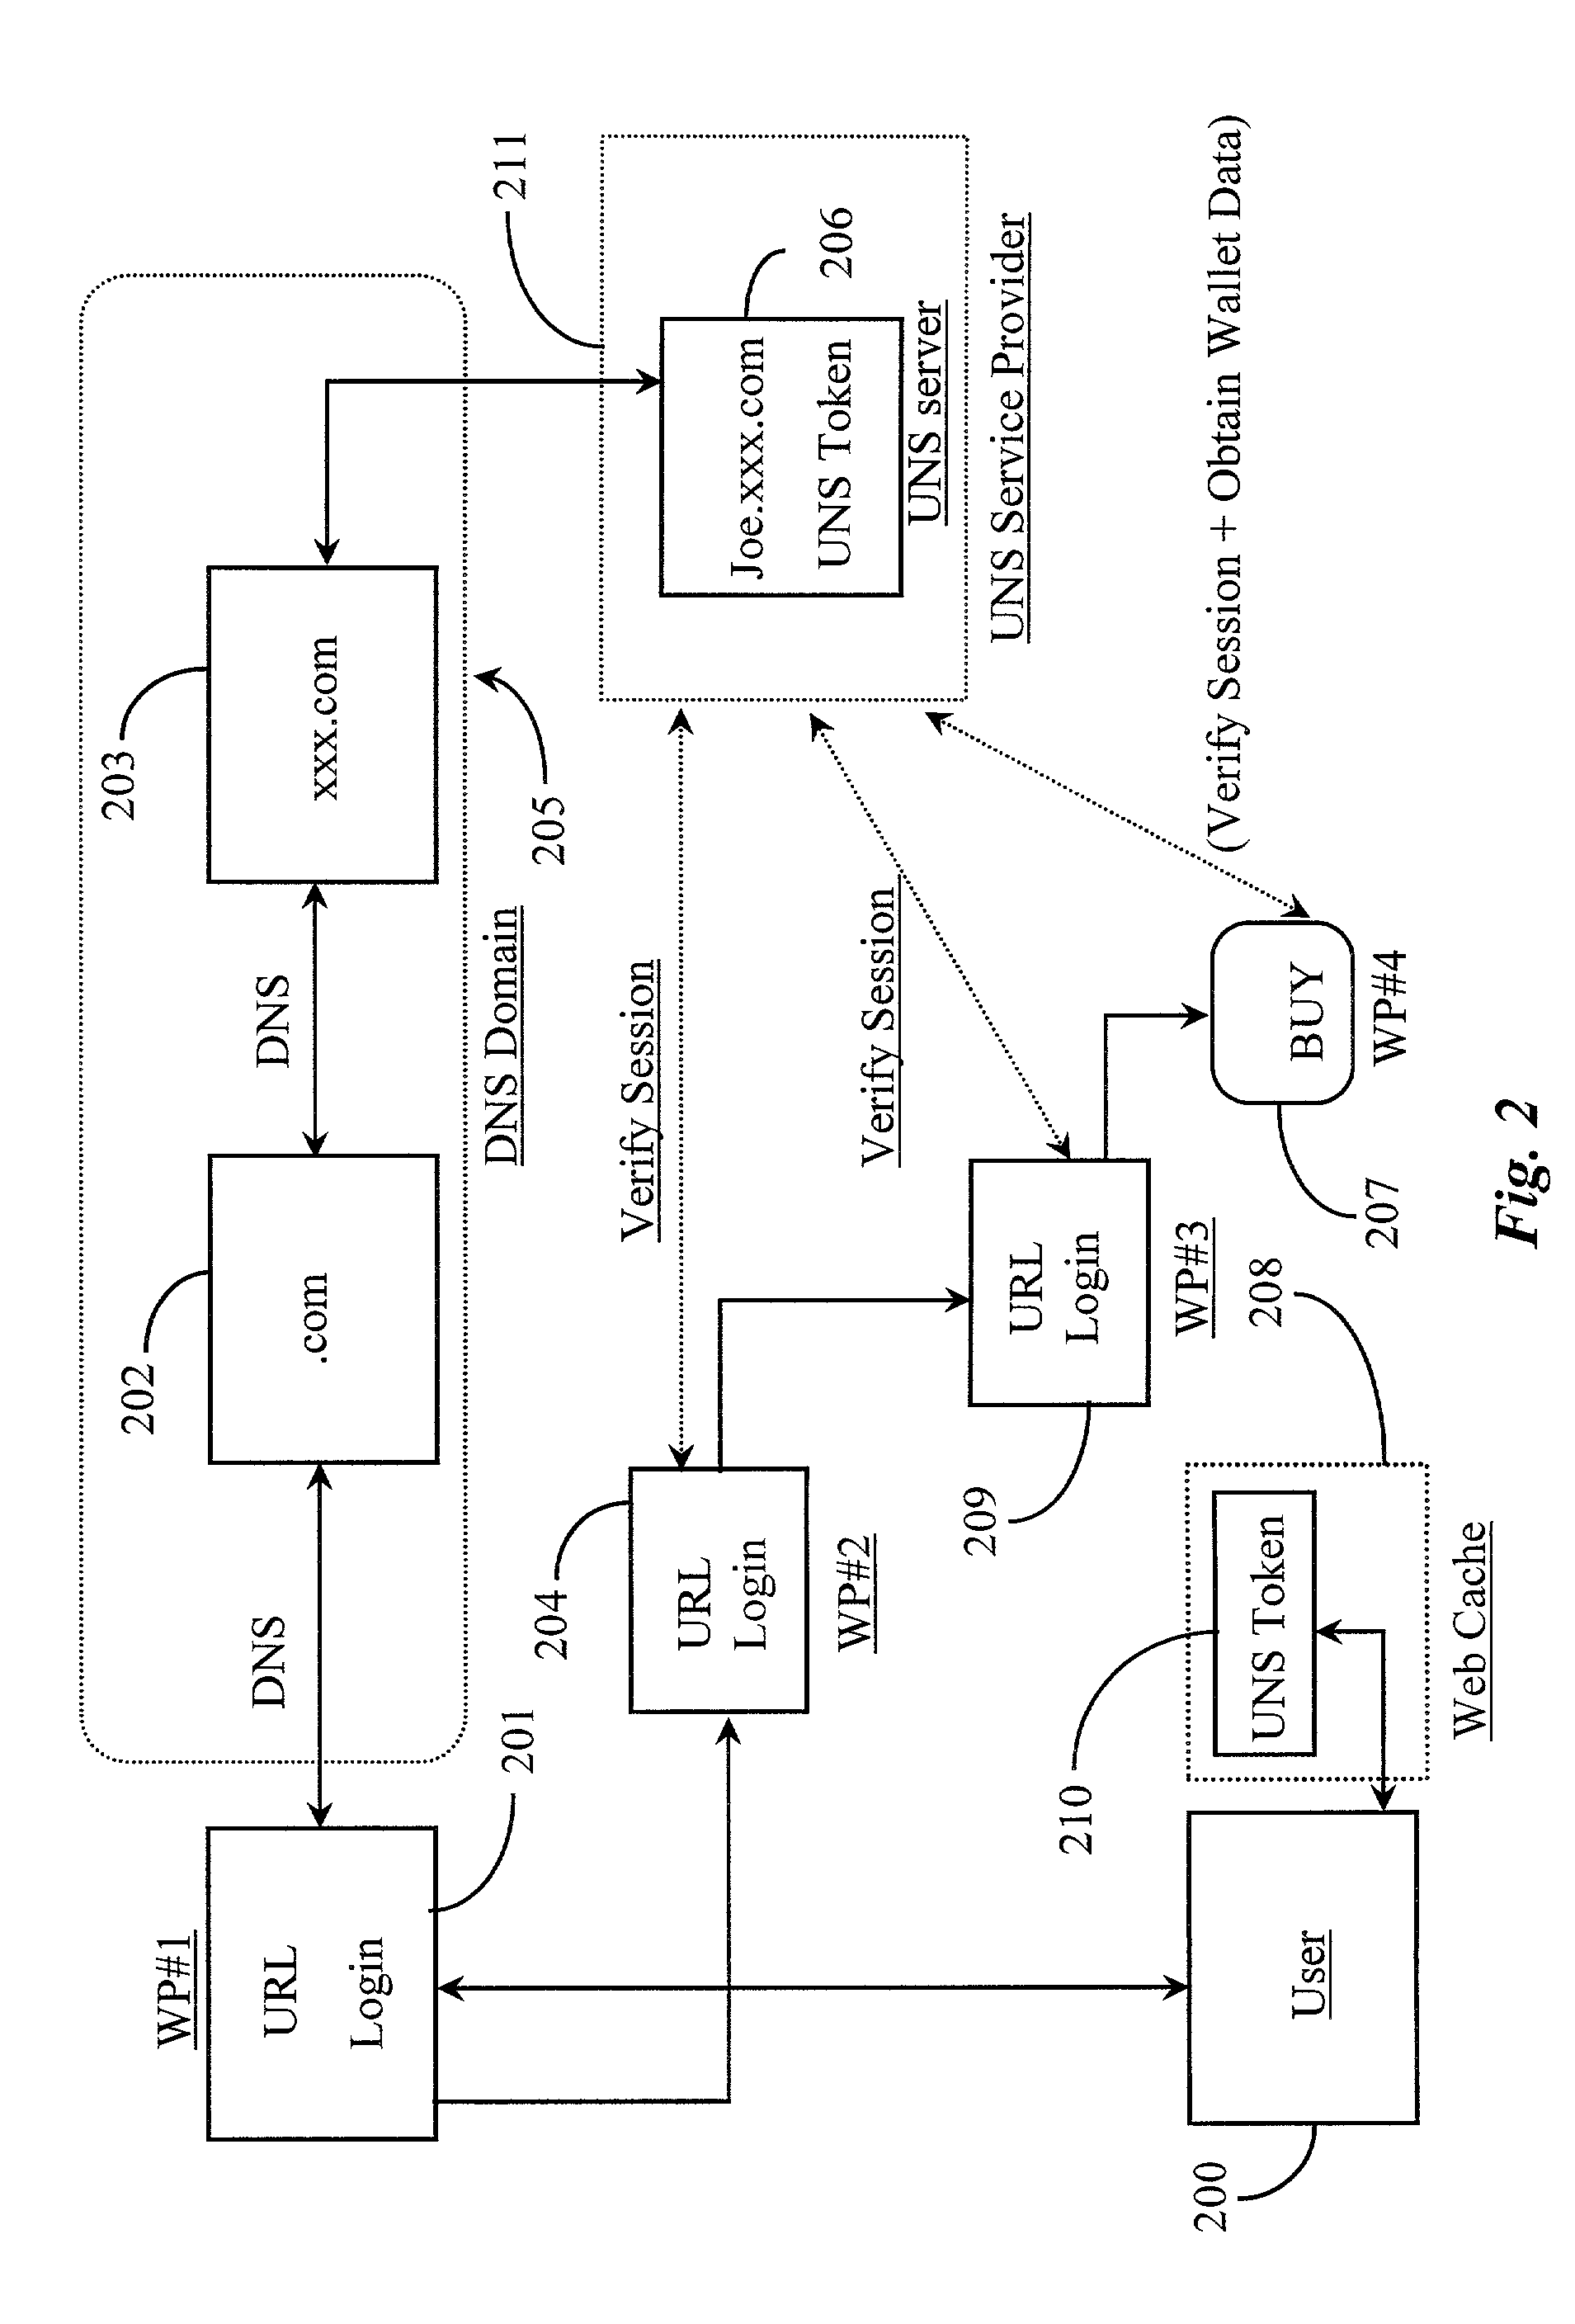 Method for verifying the identity of a user for session authentication purposes during Web navigation